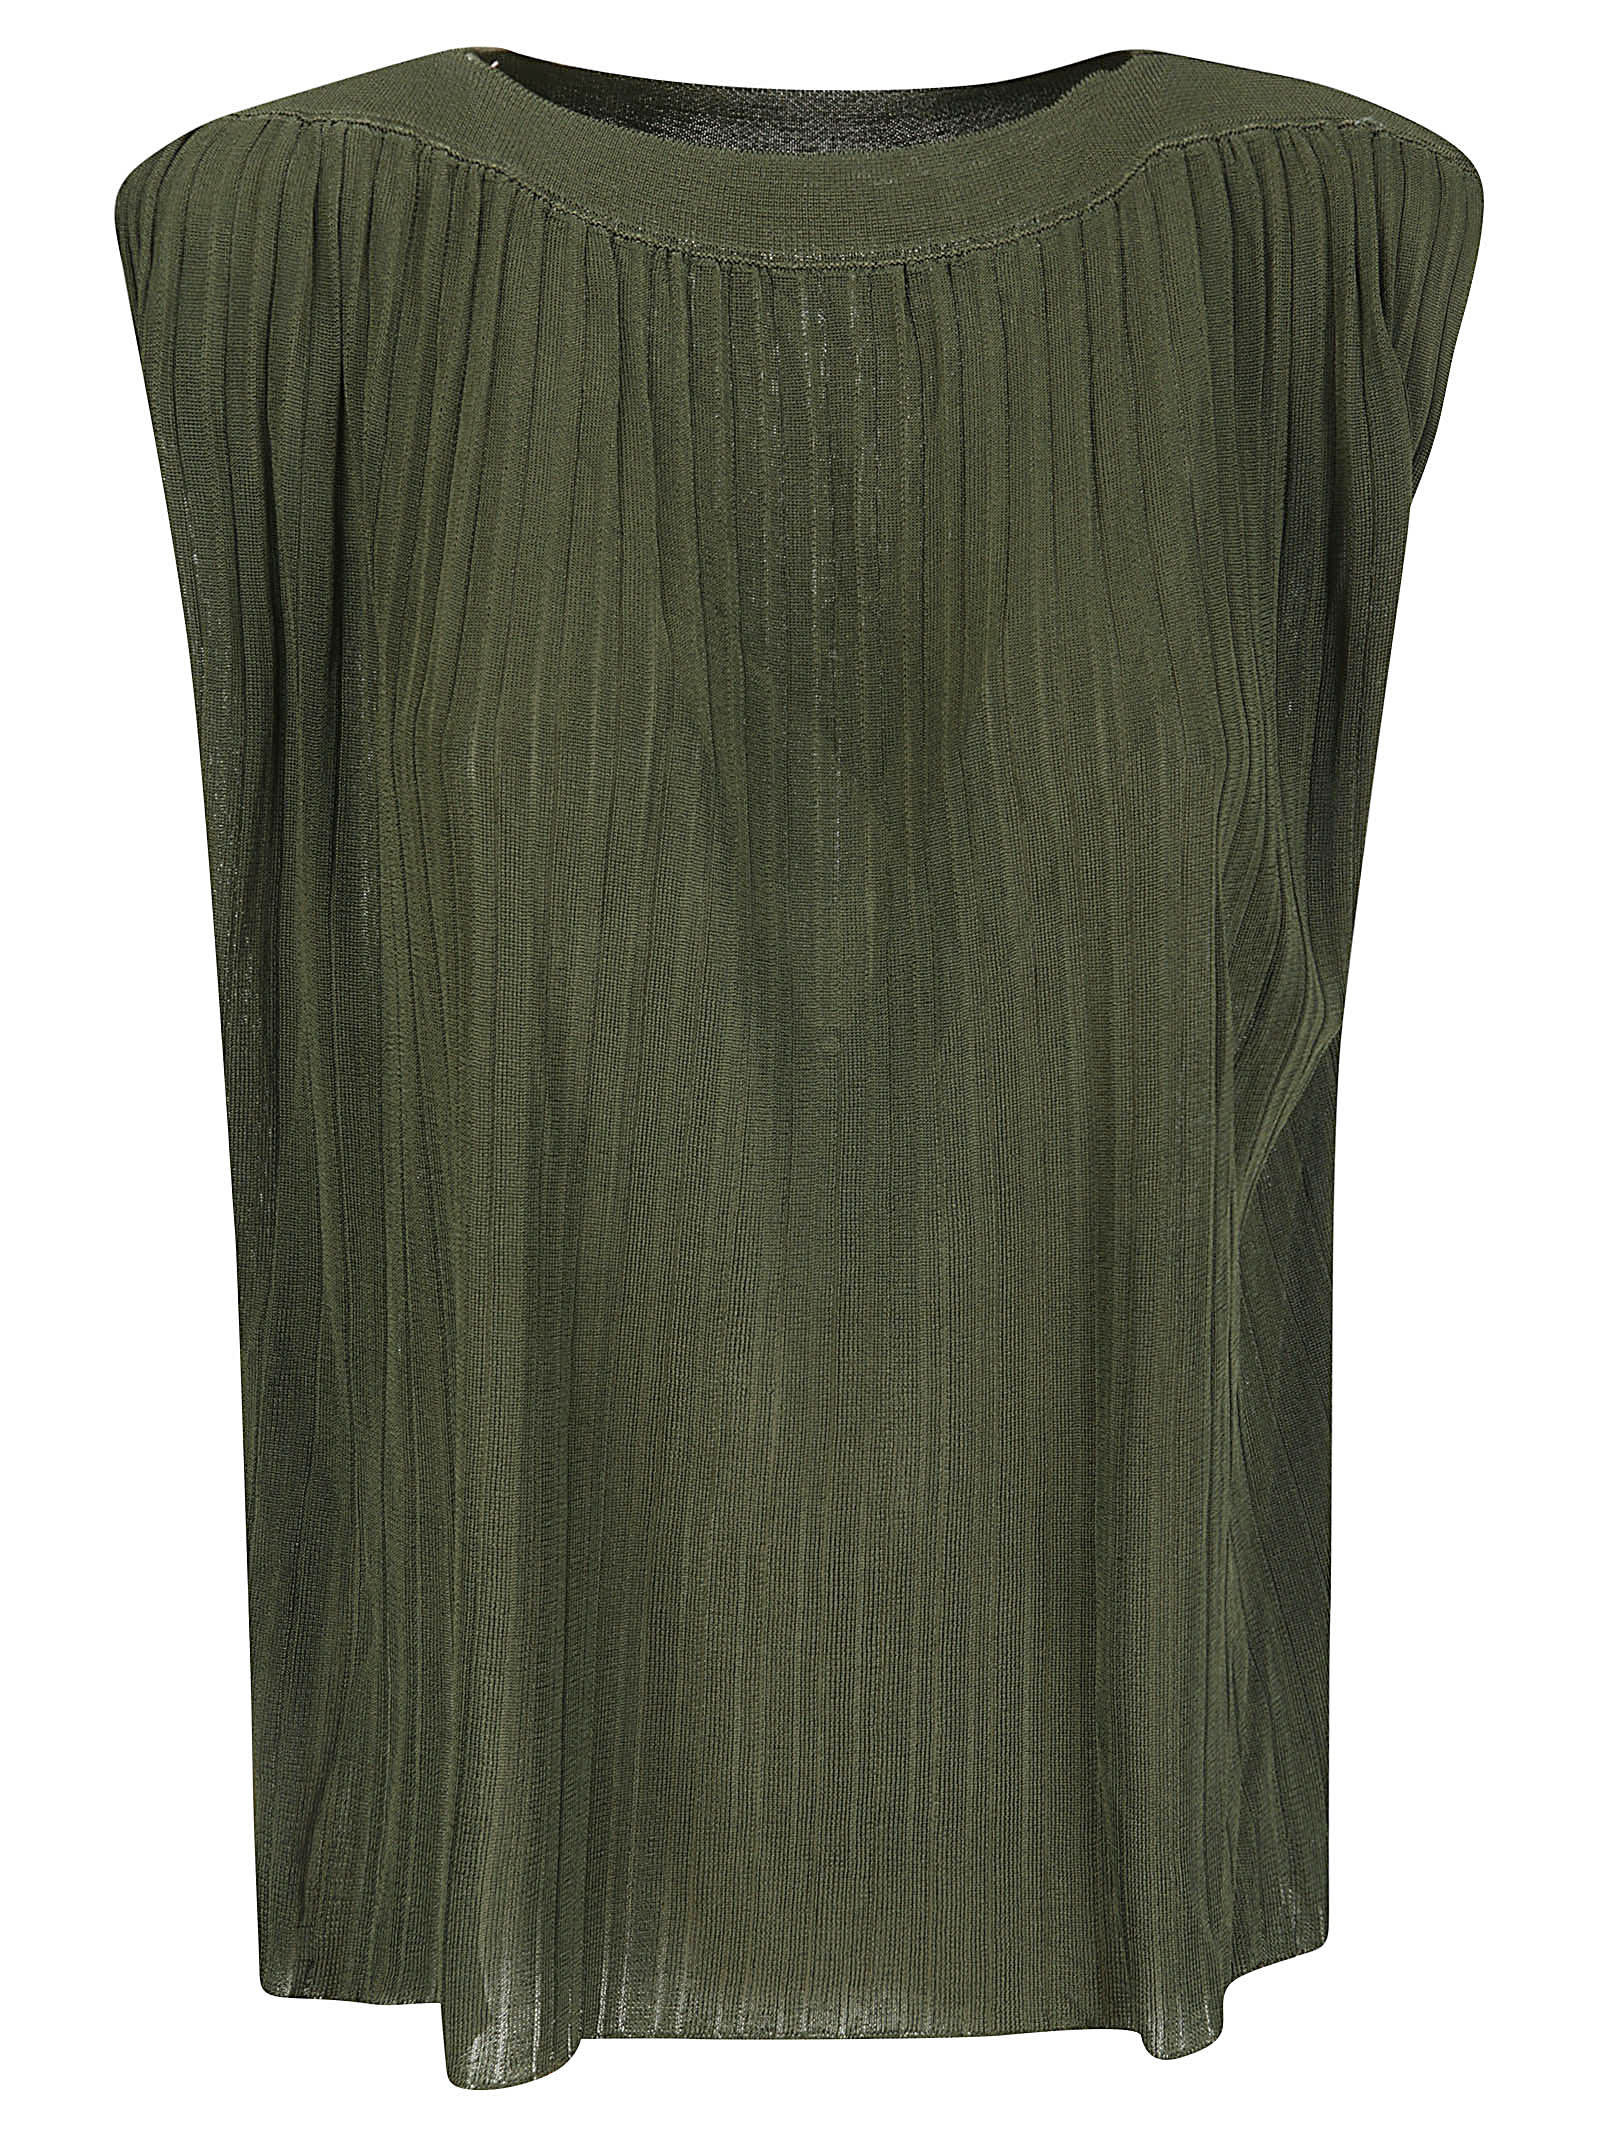 Archiviob Pleated Viscose Sweater In Military